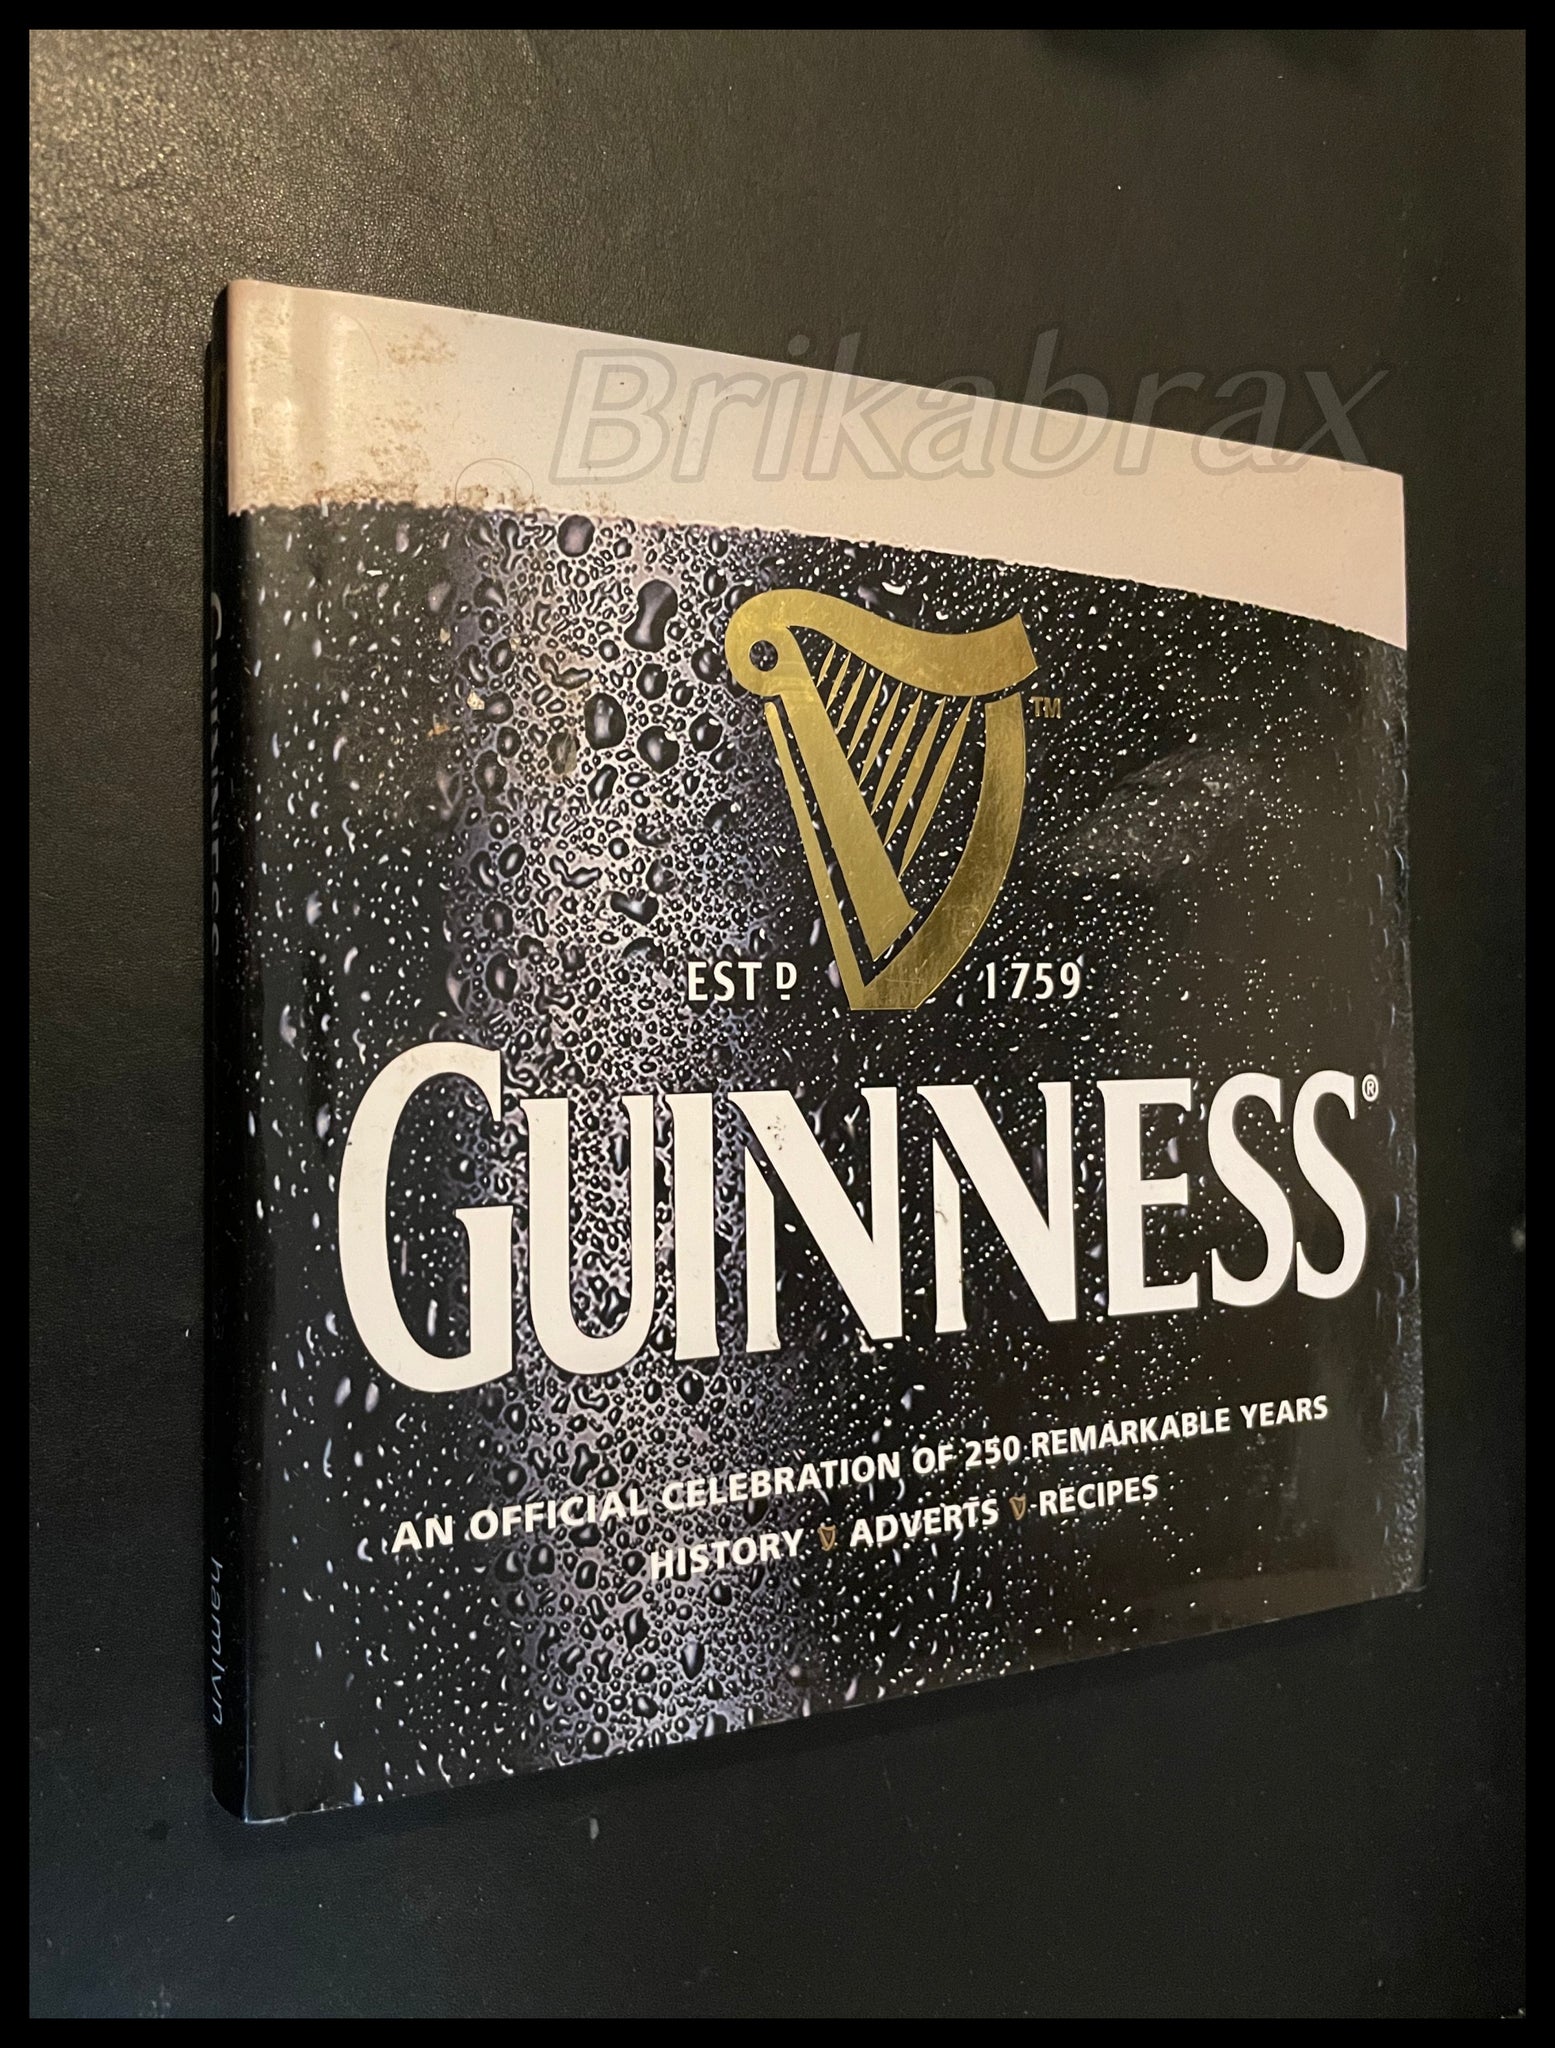 Guinness: Celebrating 250 Remarkable Years by Paul Hartley (Hardback, 2009)